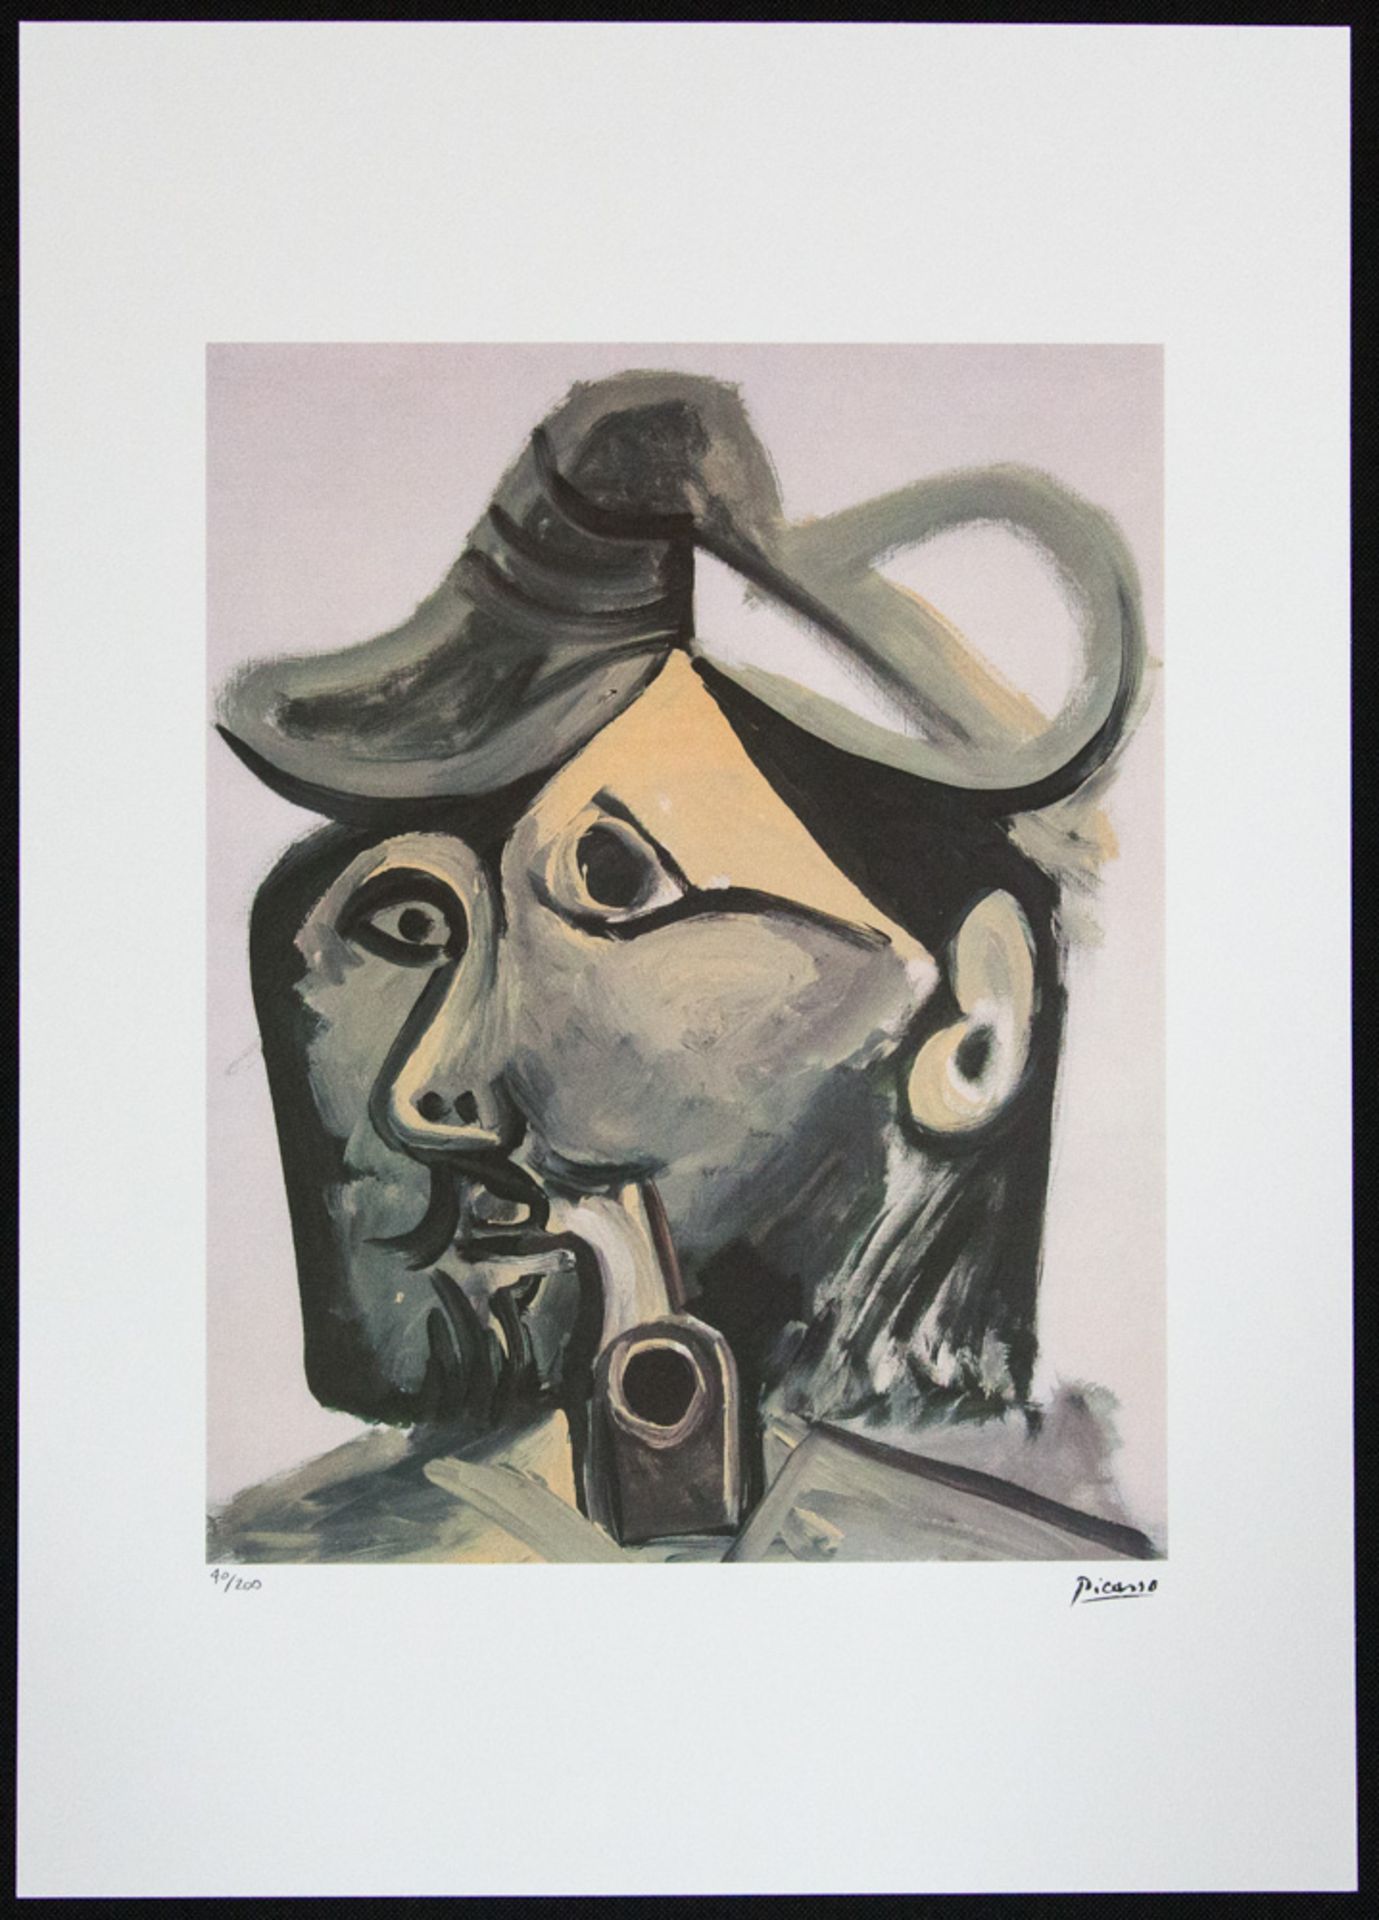 Pablo Picasso 'Head of a Man With a Pipe' - Image 2 of 6